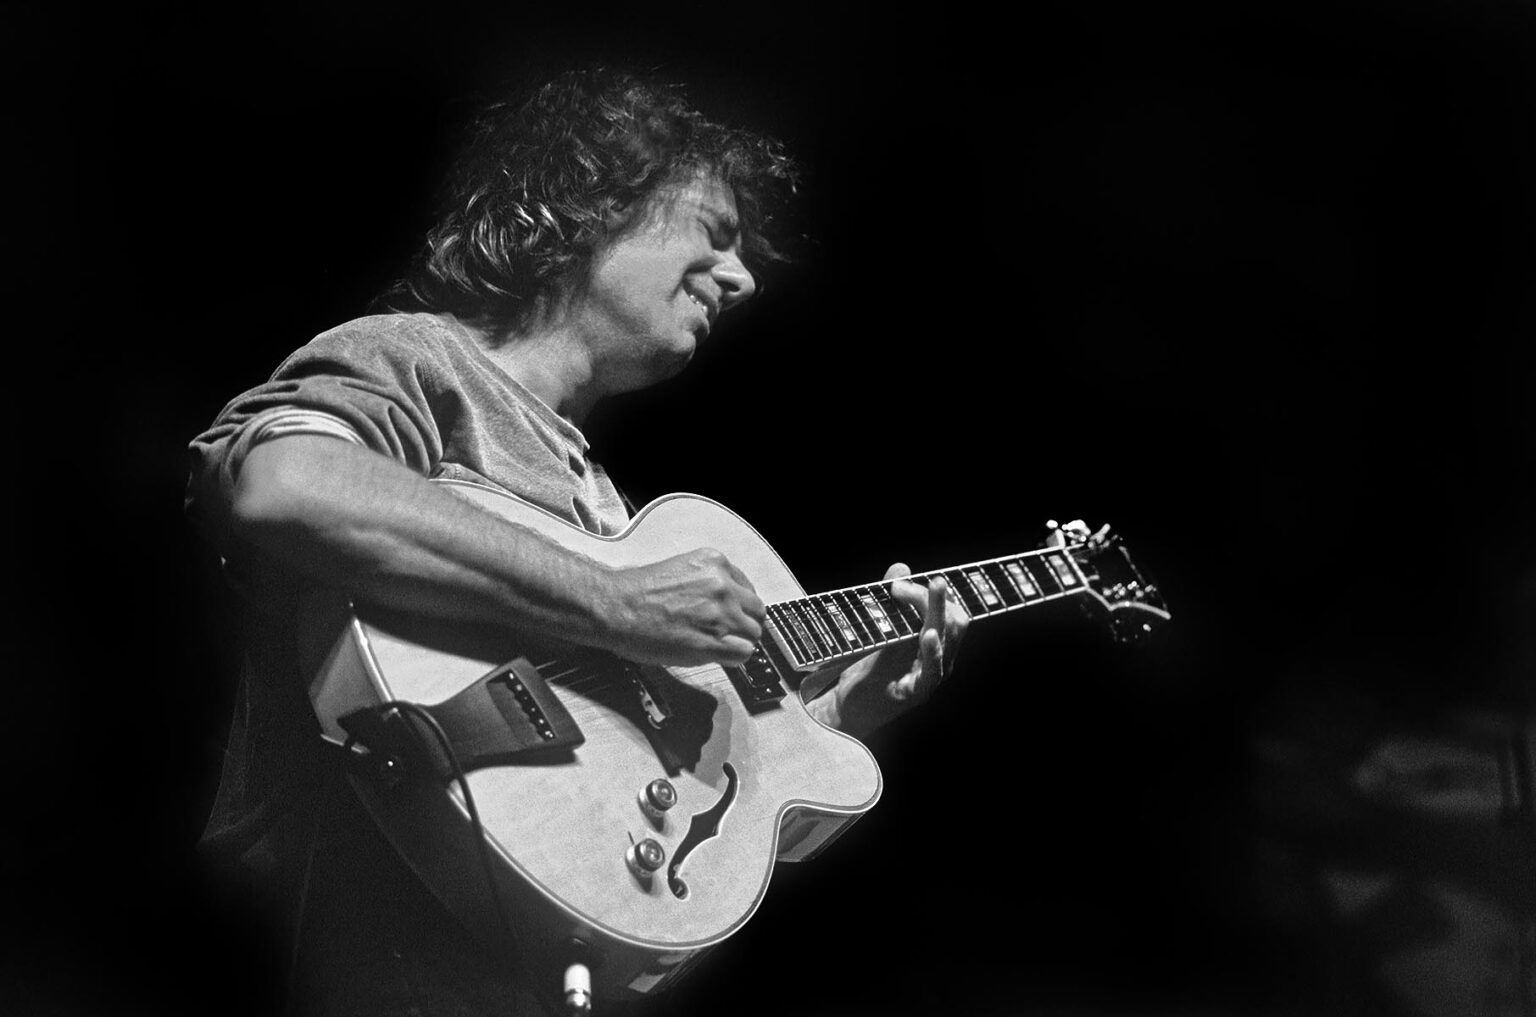 PAT METHENY performs with his trio at the MONTEREY JAZZ FESTIVAL - CALIFORNIA